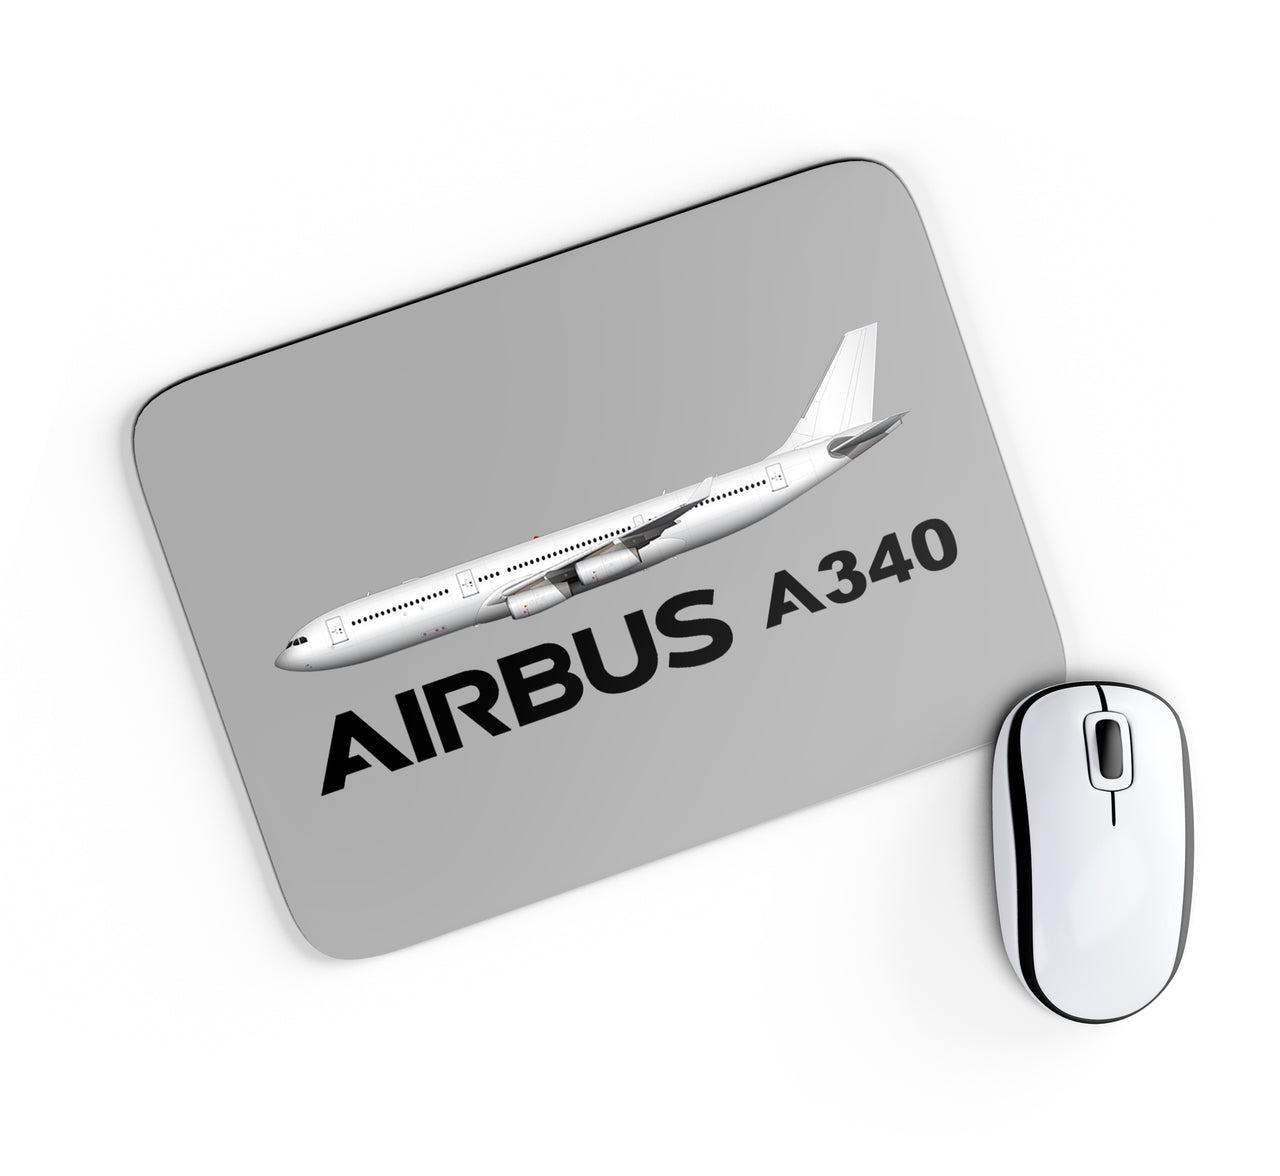 The Airbus A340 Designed Mouse Pads